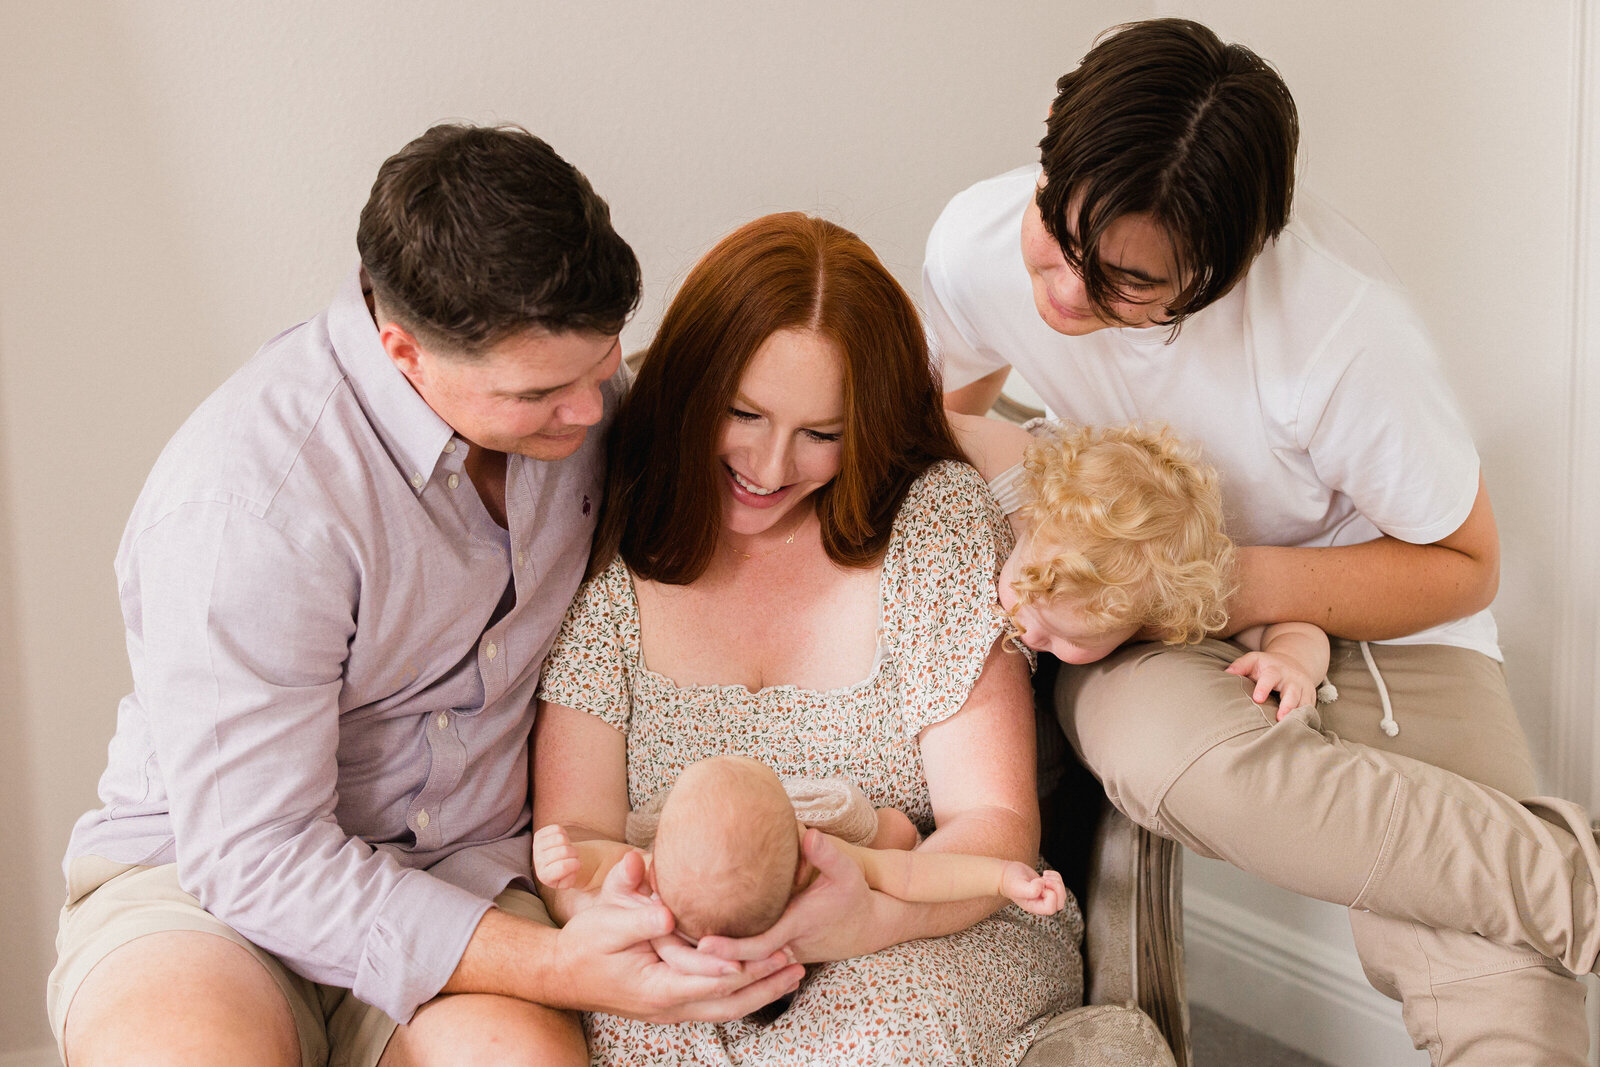 A newborn is the center of attention as mom, dad, and both siblings all gather around him to stare